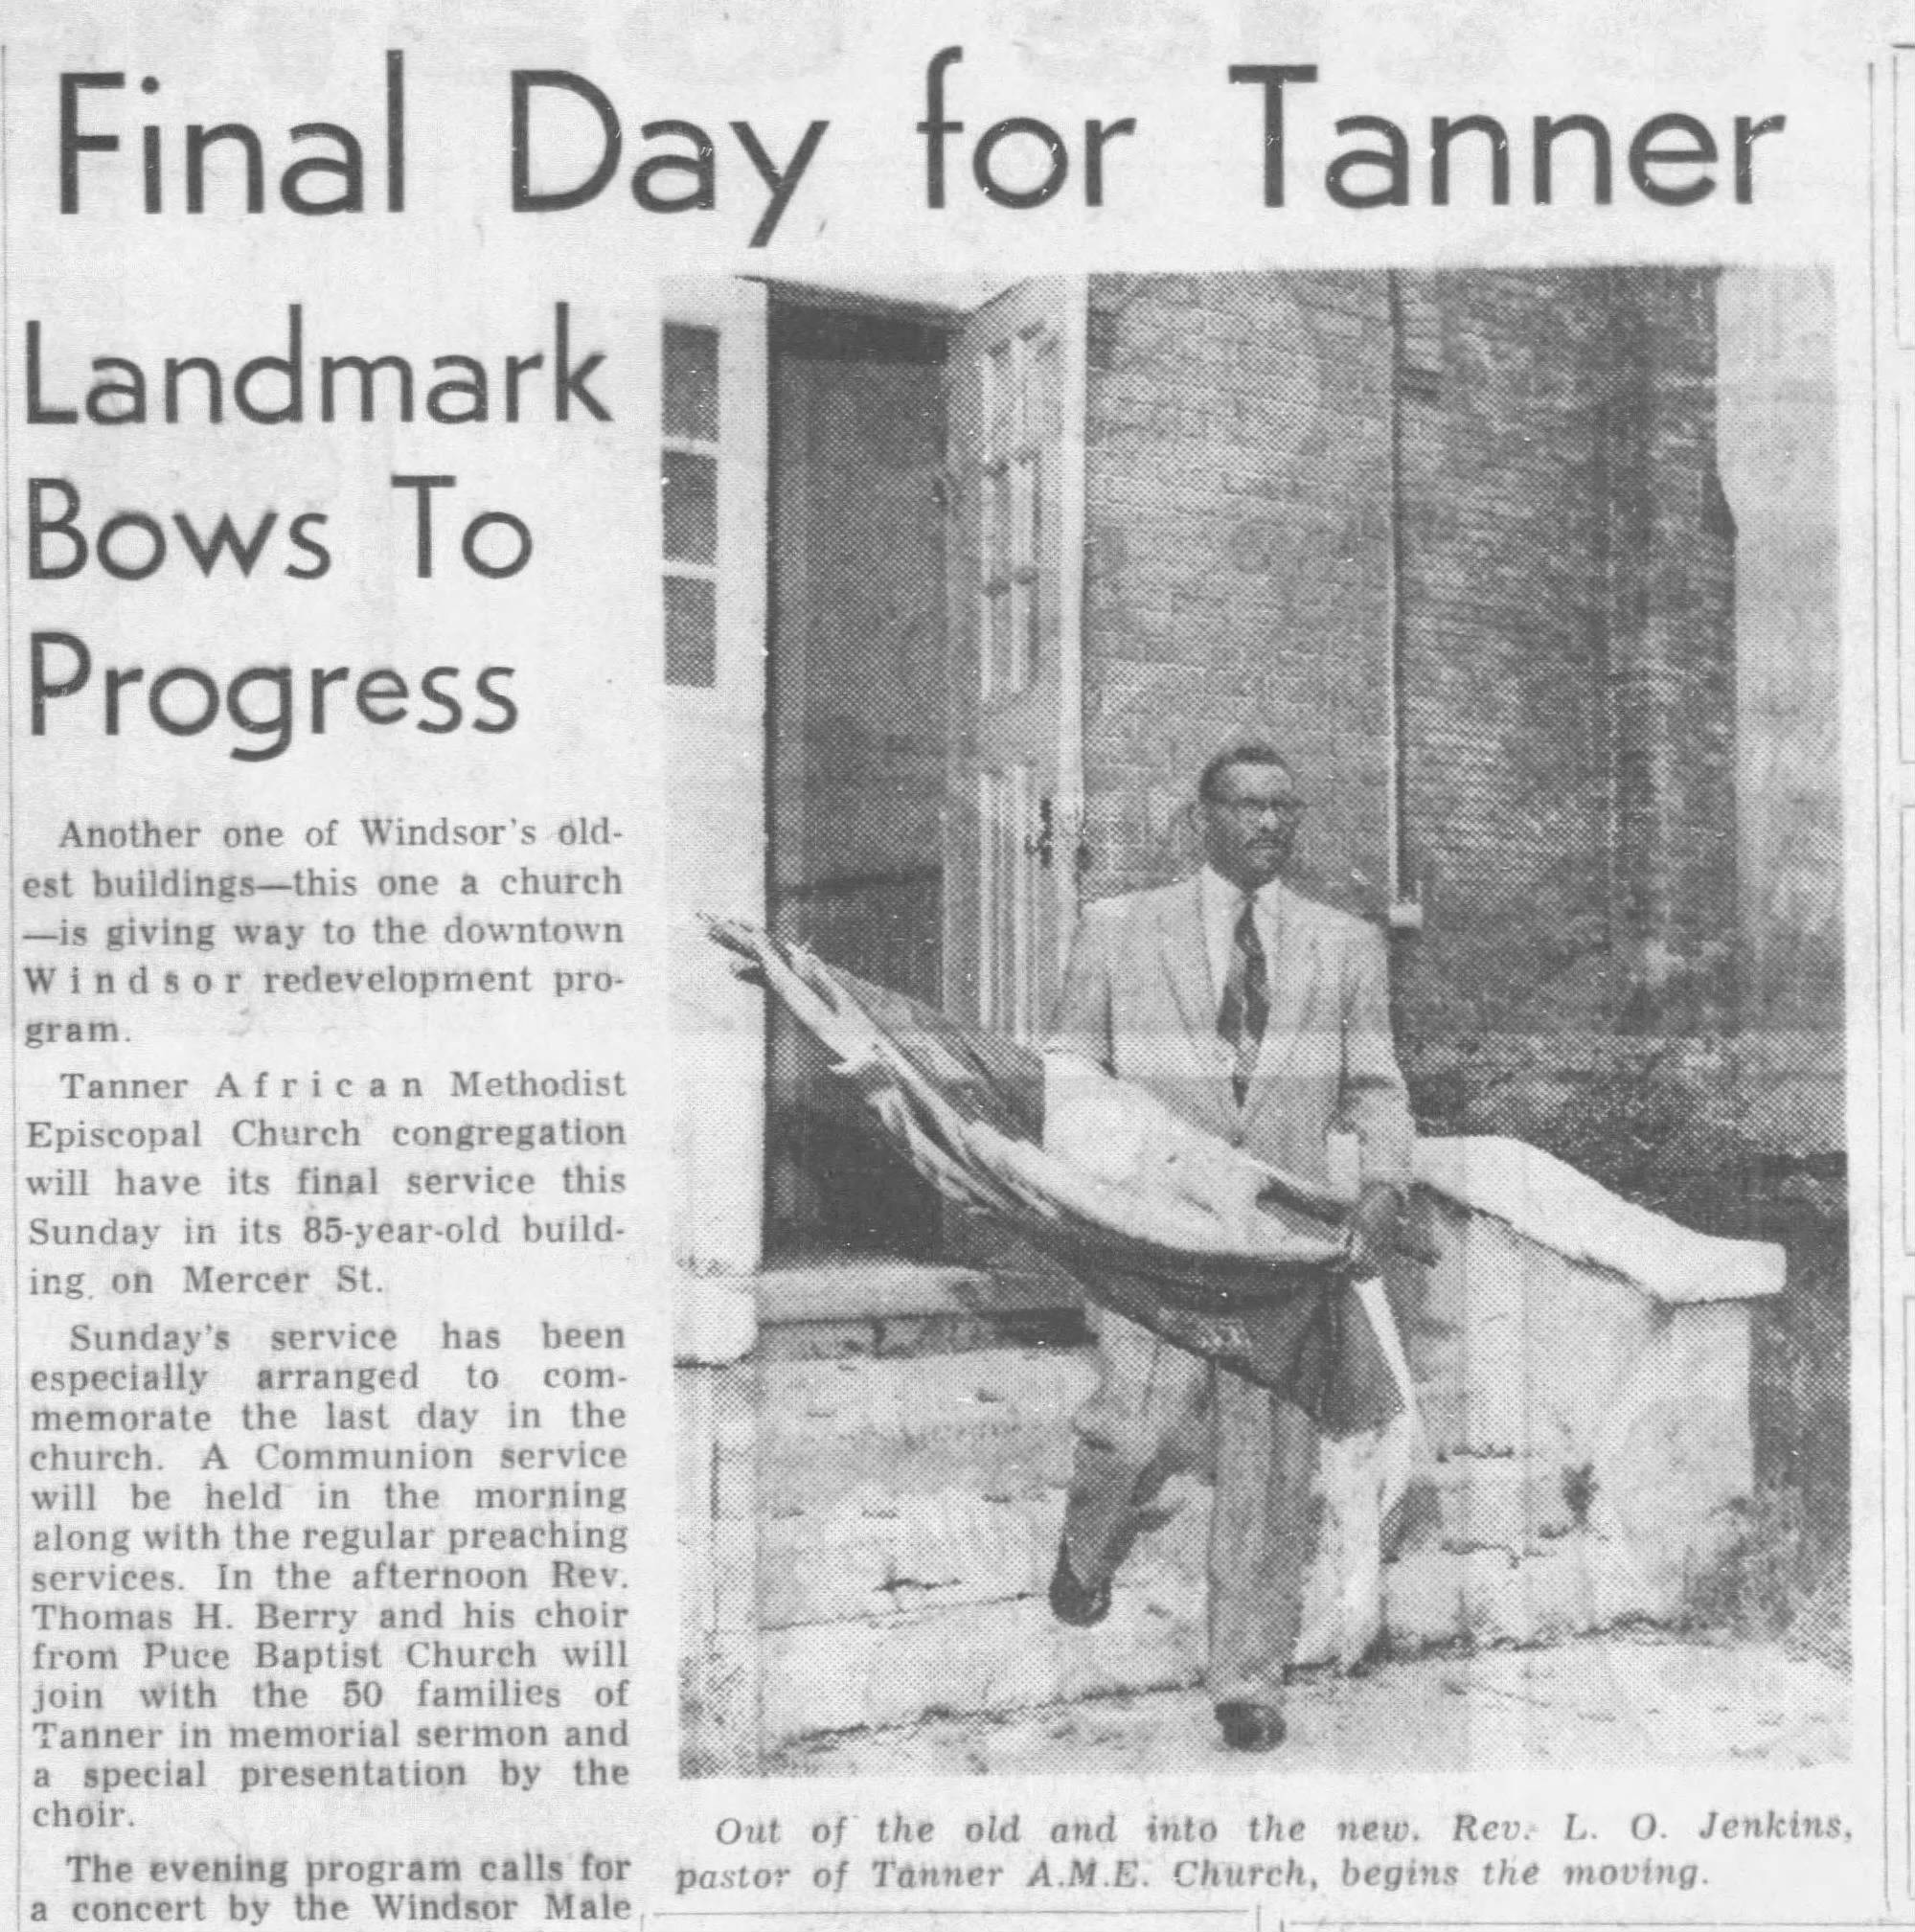 Newspaper article about the last days of the Tanner AME Church